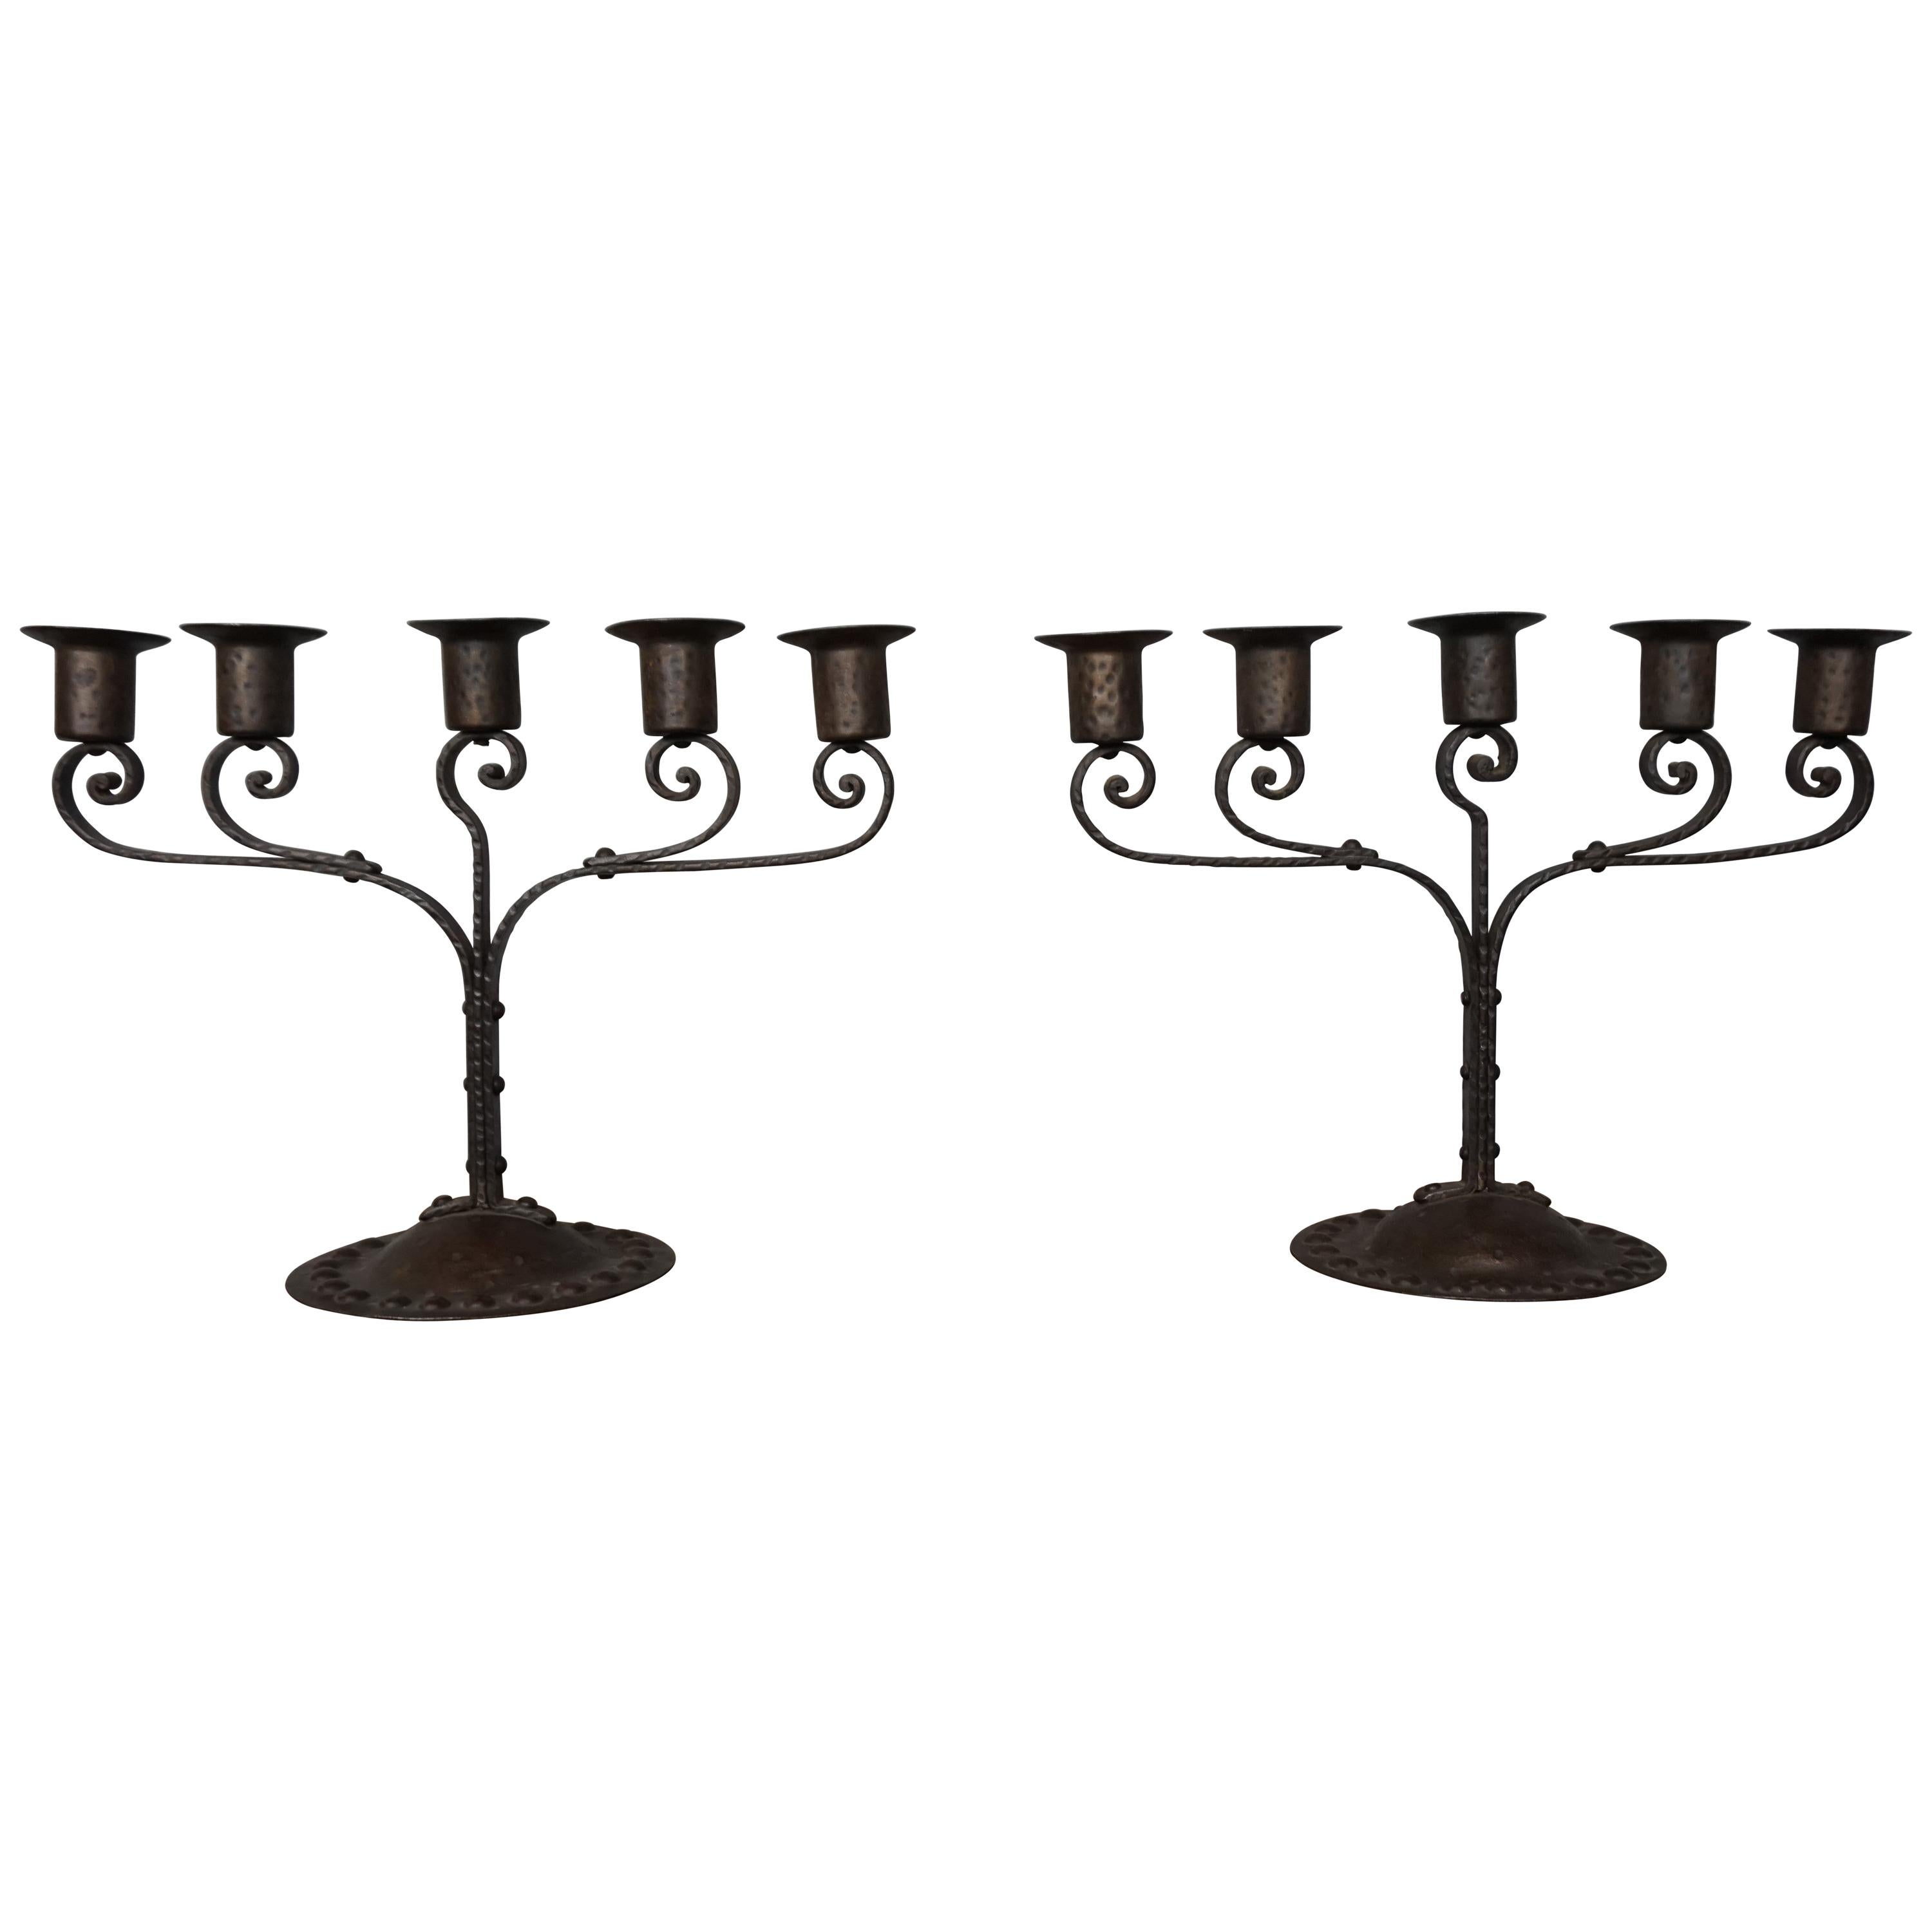 Unique Pair of Hand Forged Wrought Iron Arts & Crafts Table Candelabras, 1910s